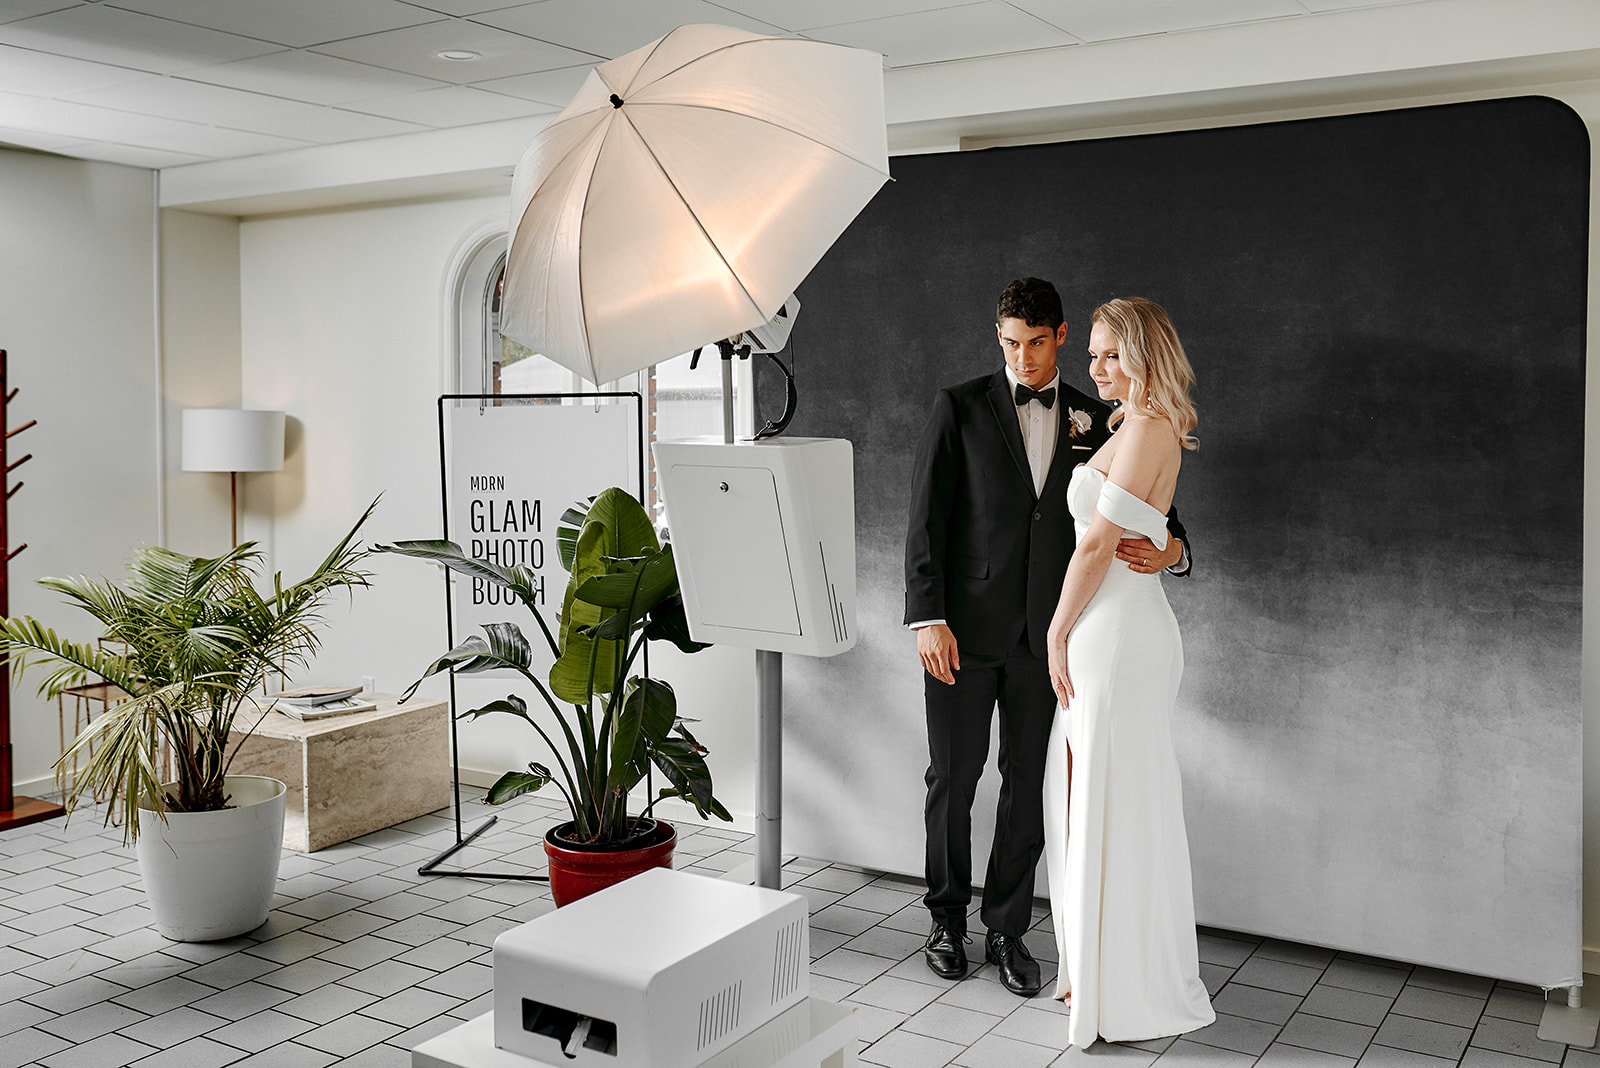 Bash By Revelle BLVD Maide MDRN photo booth Couple Bride and Groom Fun Preslee Minimalist Off-Shoulder Wedding Dress